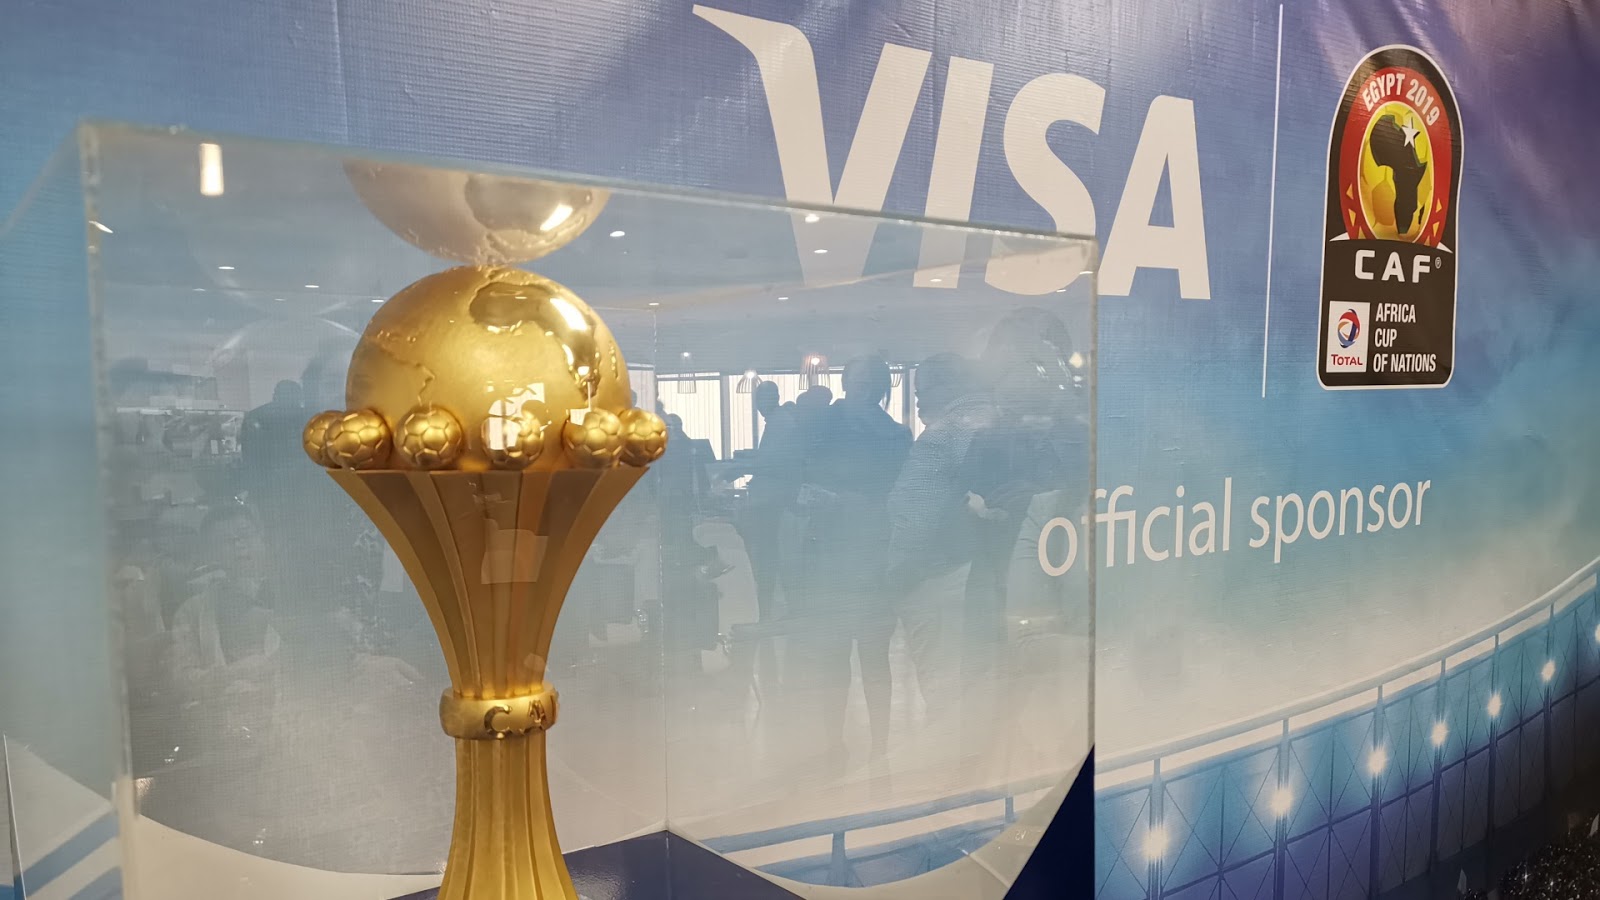 AFCON 2019: Visa to offer Nigeria exclusive tickets for live matches in Egypt